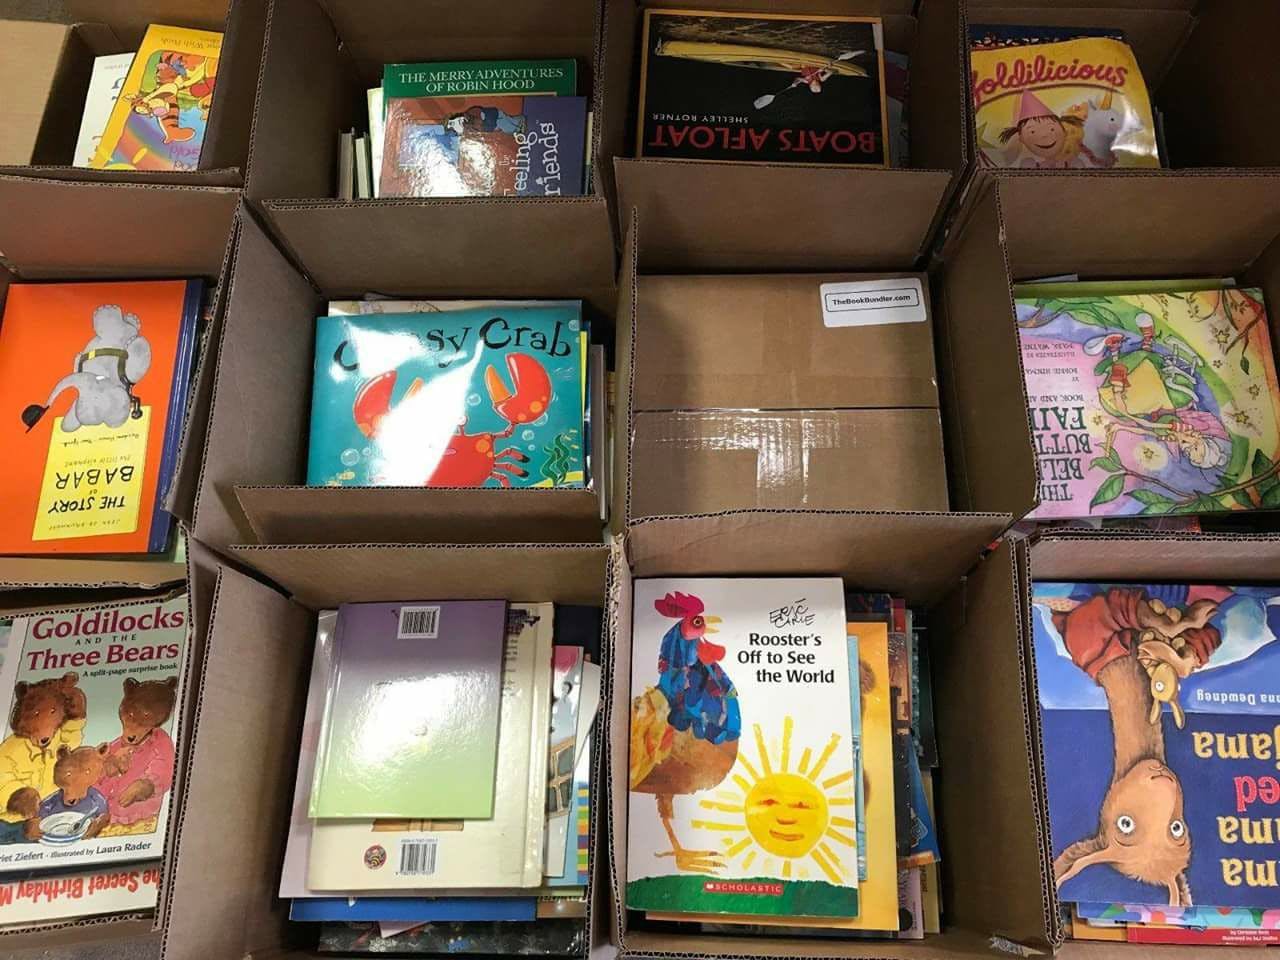 Boxes filled with Children's Books sitting on the floor.